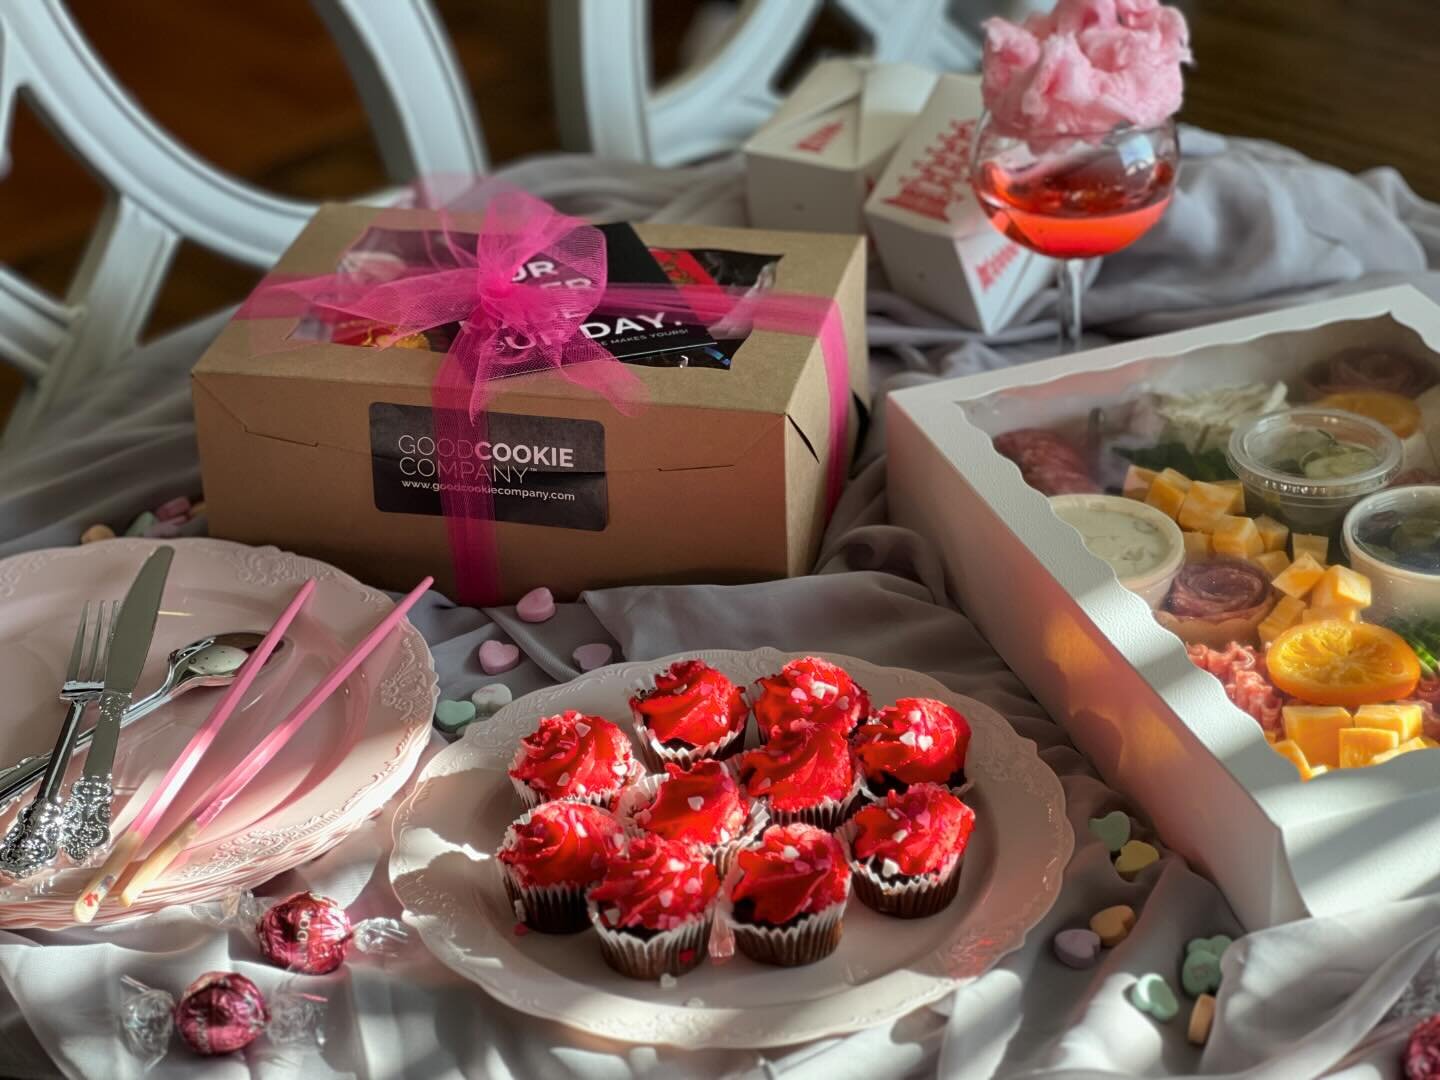 You&rsquo;ll be relieved to know that this is the last belated Valentine&rsquo;s Day post! Lol. 🫣 We just couldn&rsquo;t help but share our cute little GALentine&rsquo;s Girl Dinner spread. Which, by the way, we also celebrated late because we have 